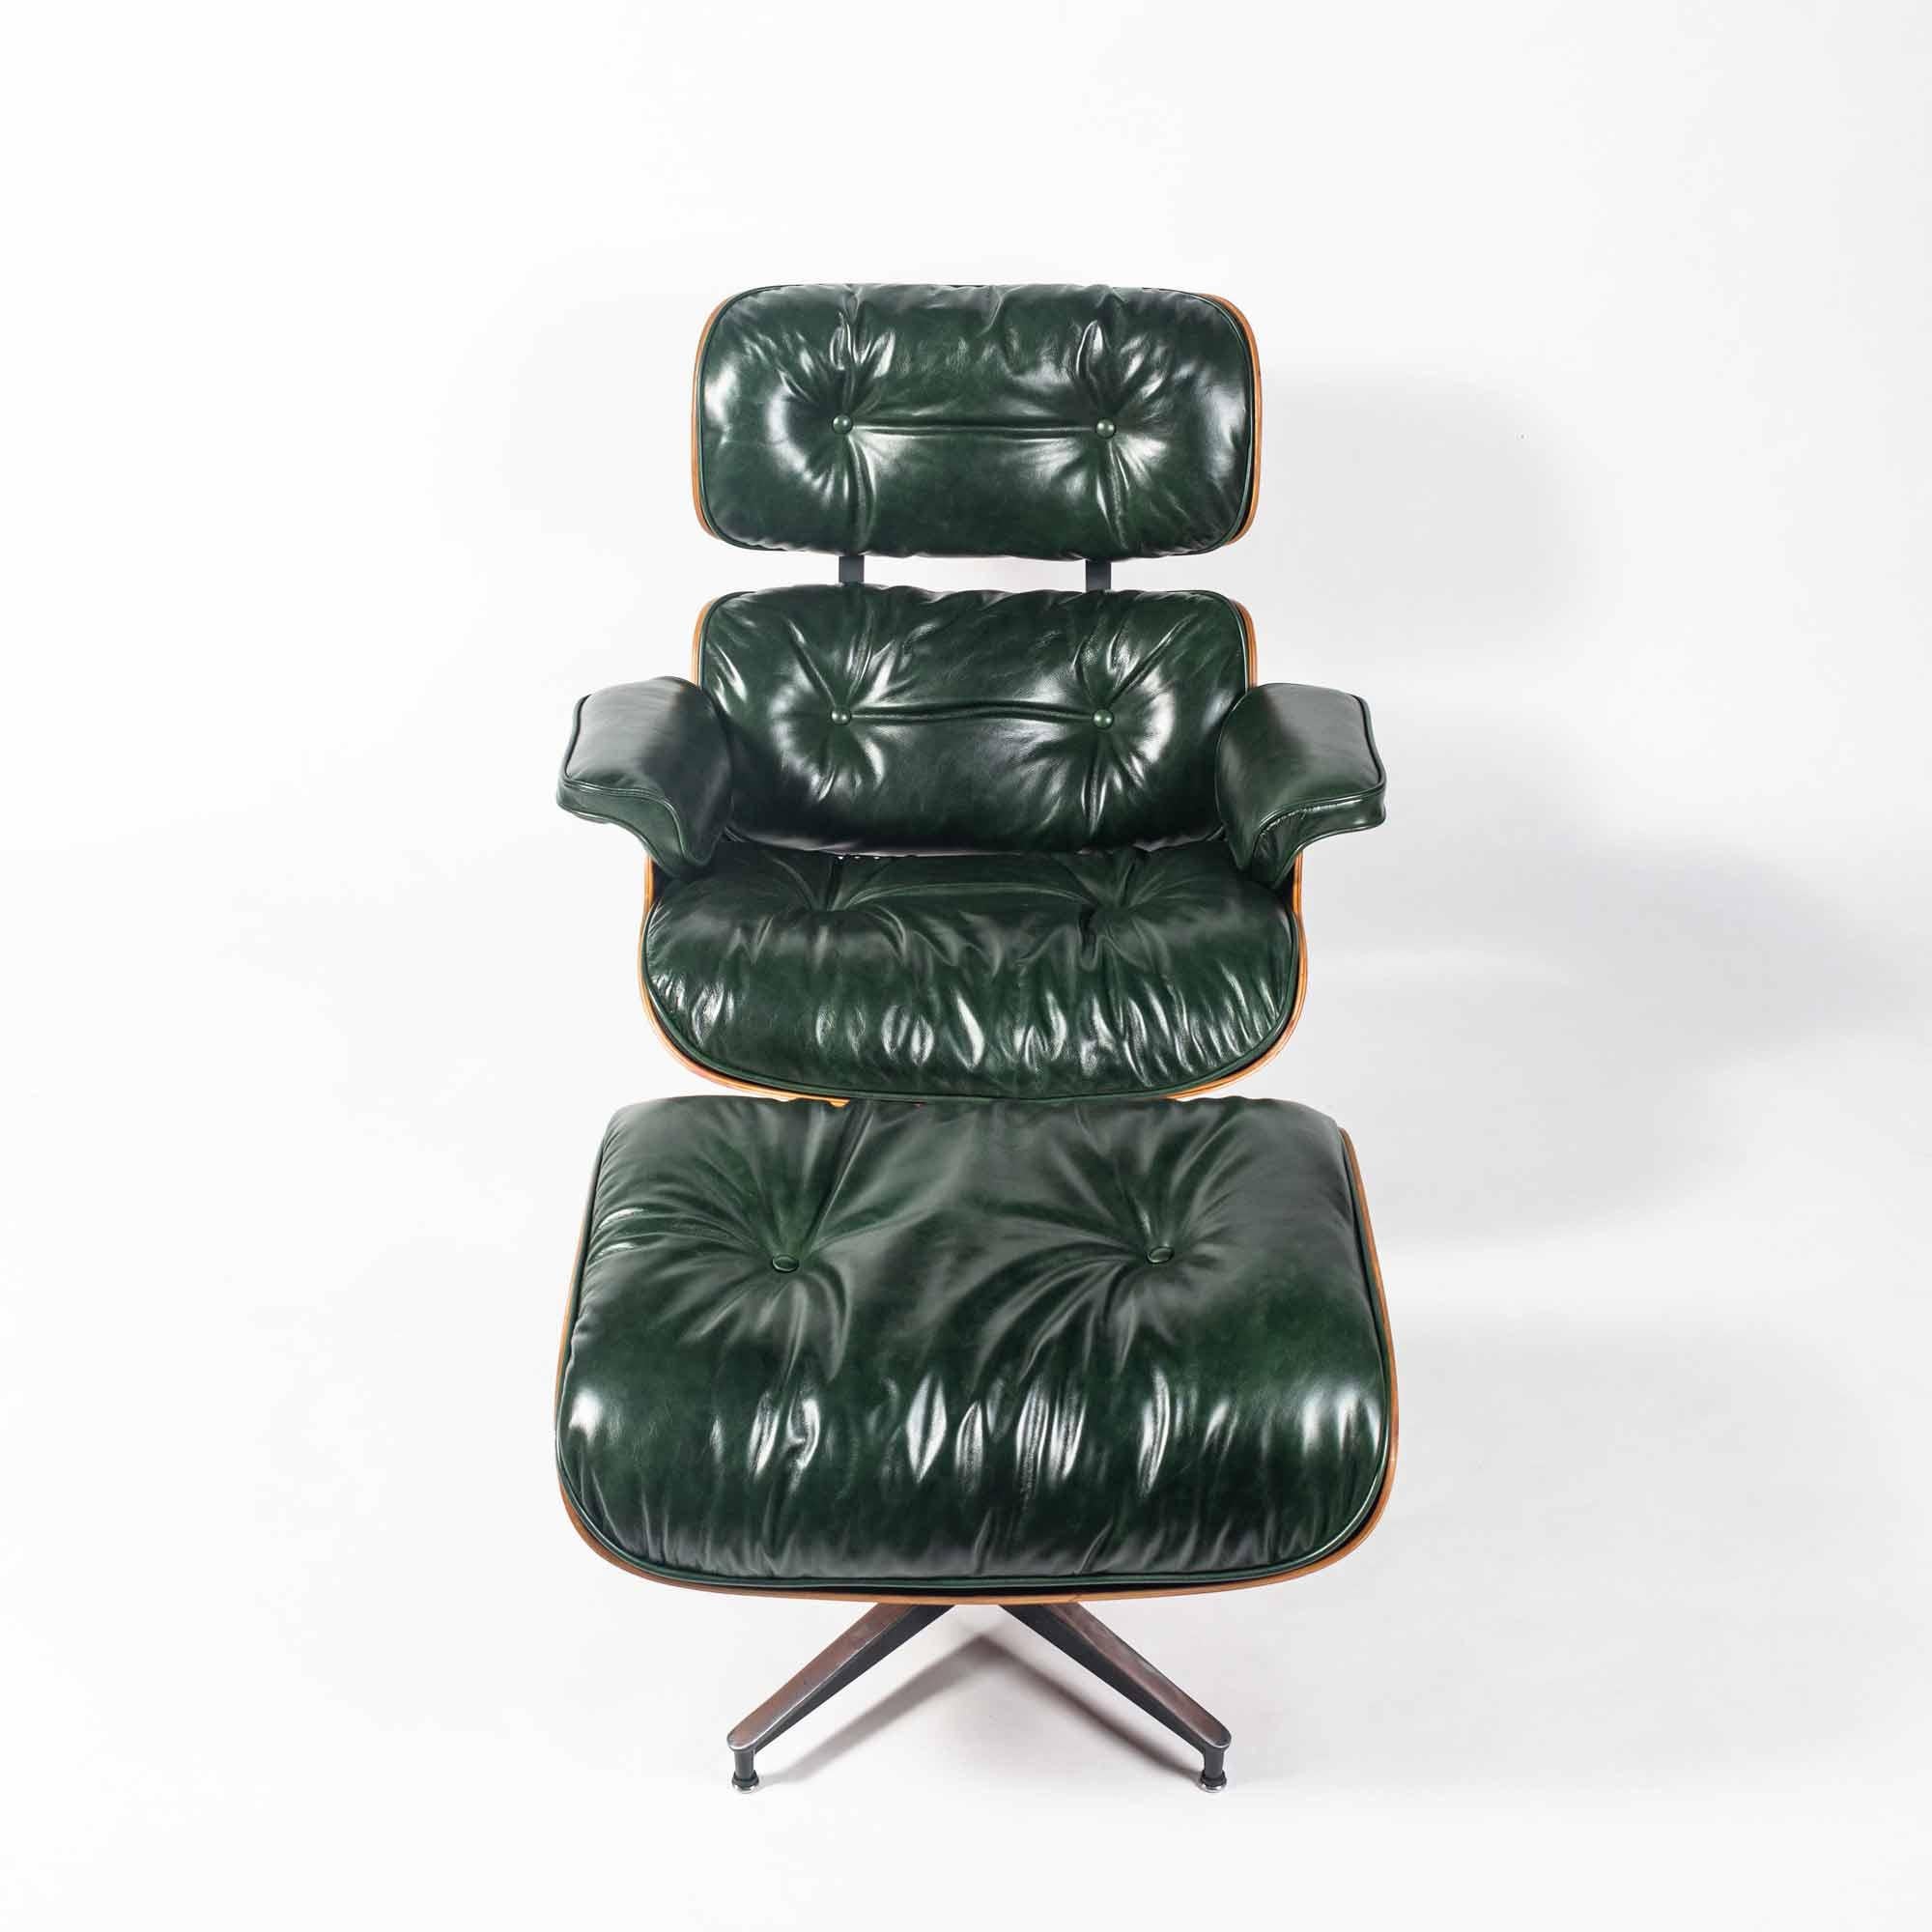 Mid-Century Modern Customed Order, 3rd Gen Eames Lounge Chair in British Racing Green Leather